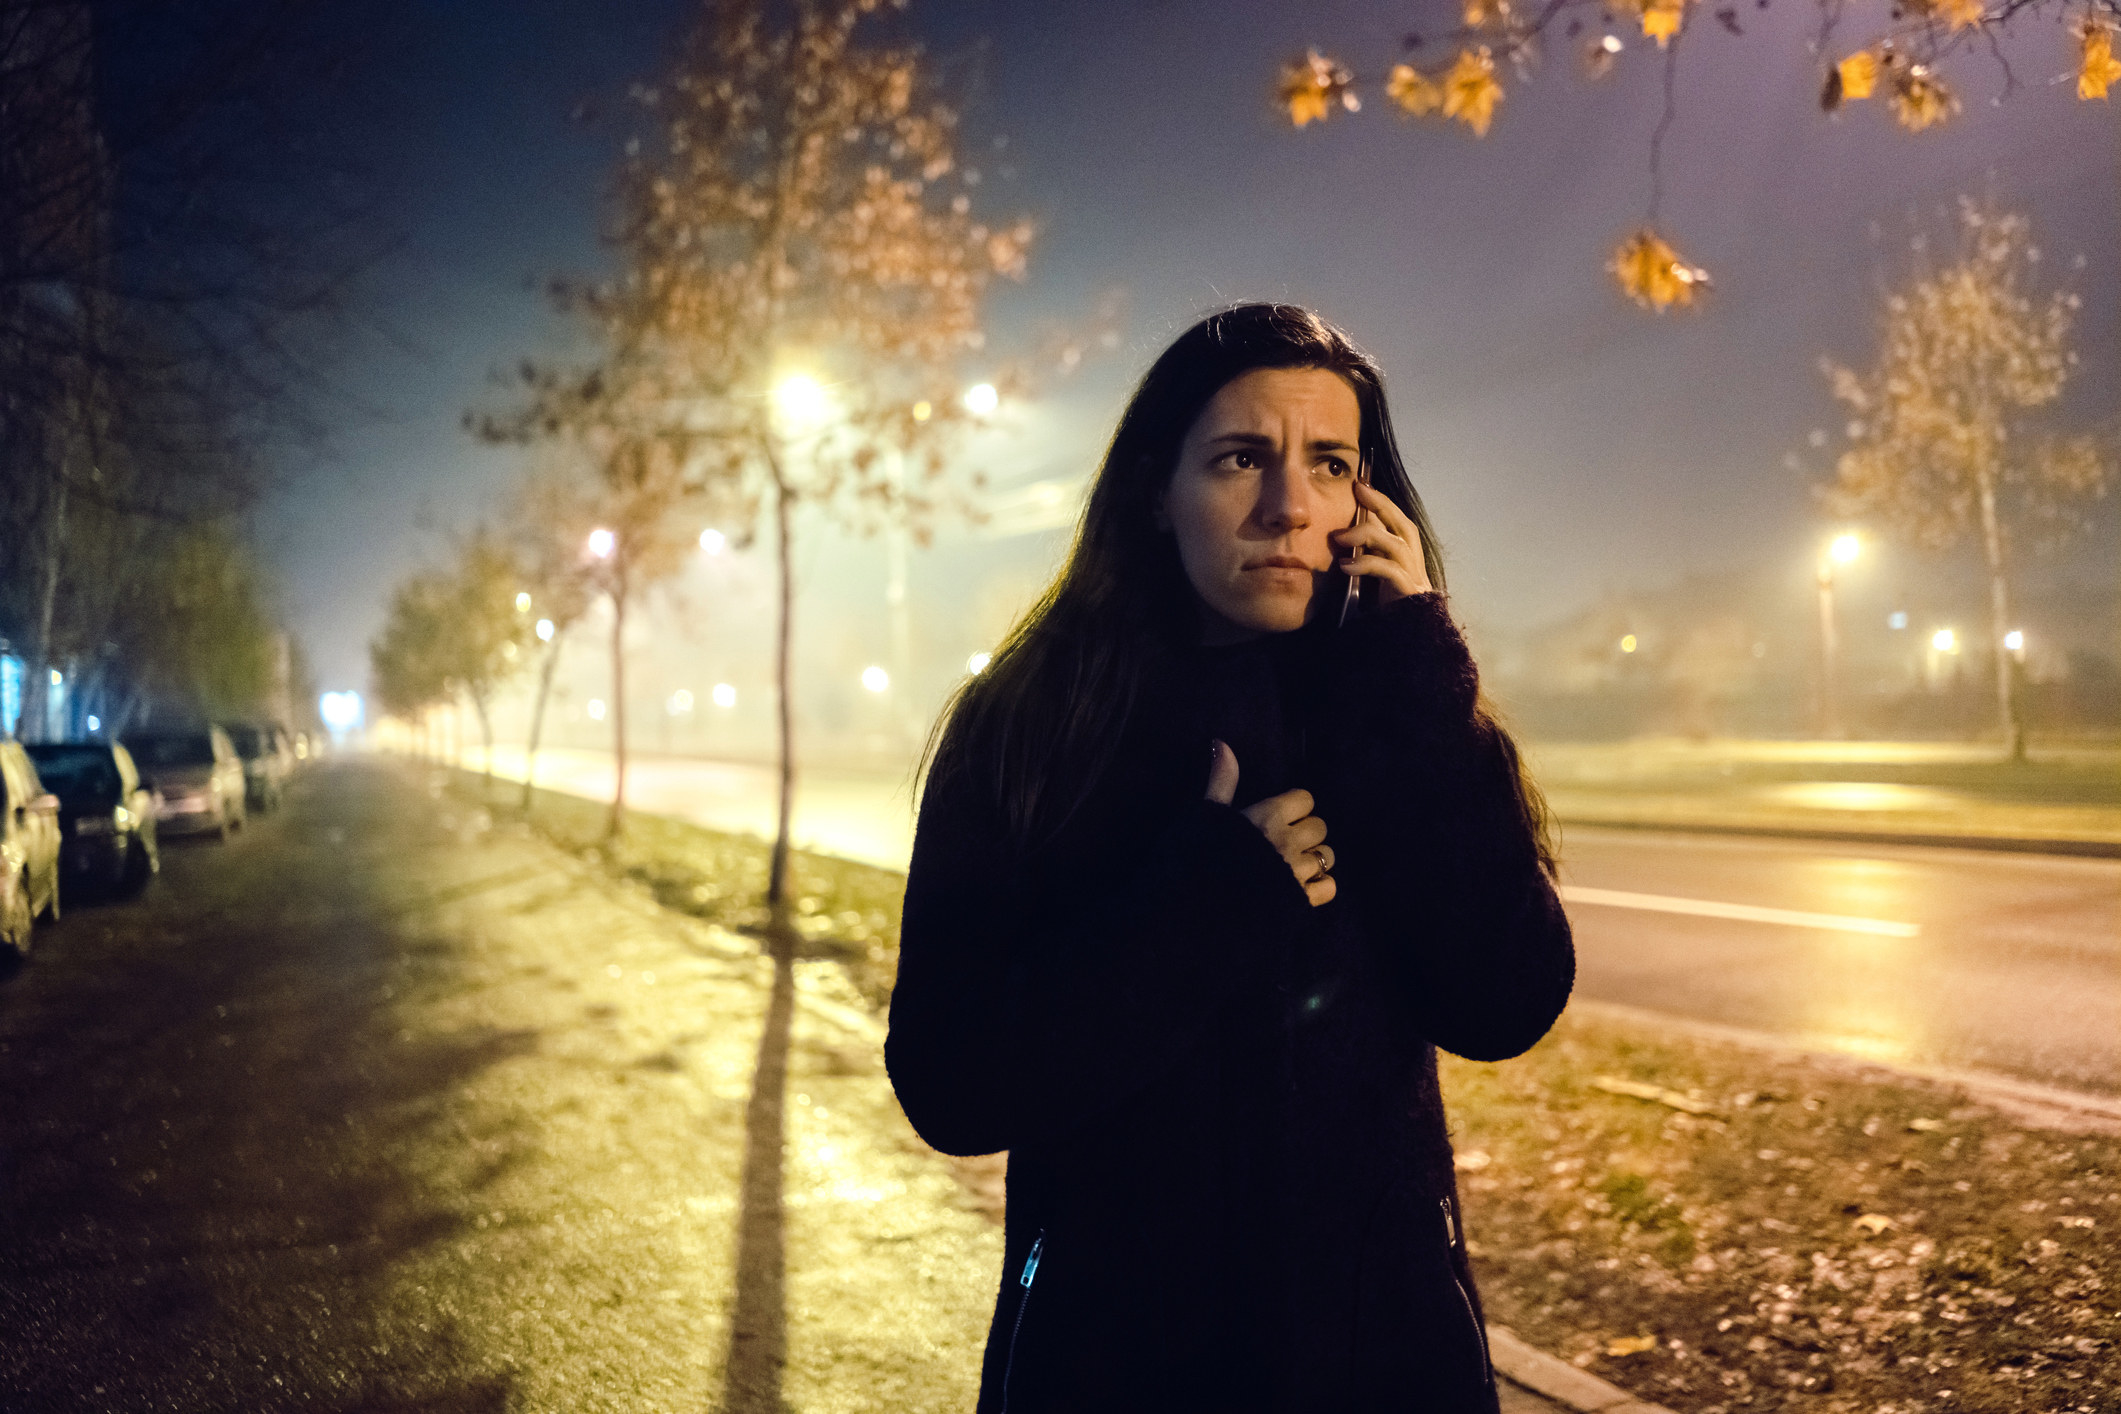 A woman on the phone while on a walk